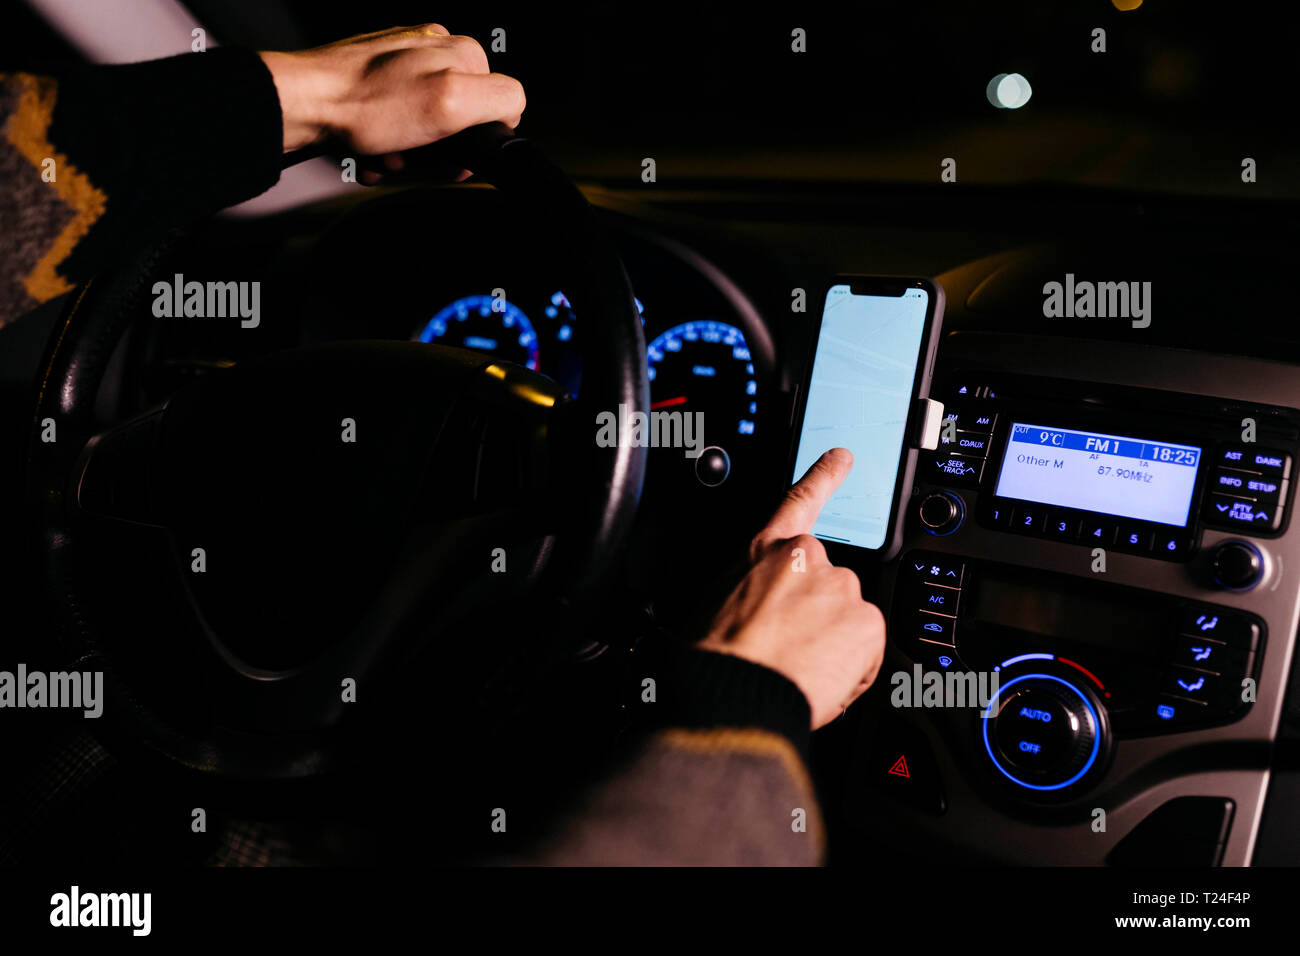 Man using cell phone with road maps in the car at night Stock Photo